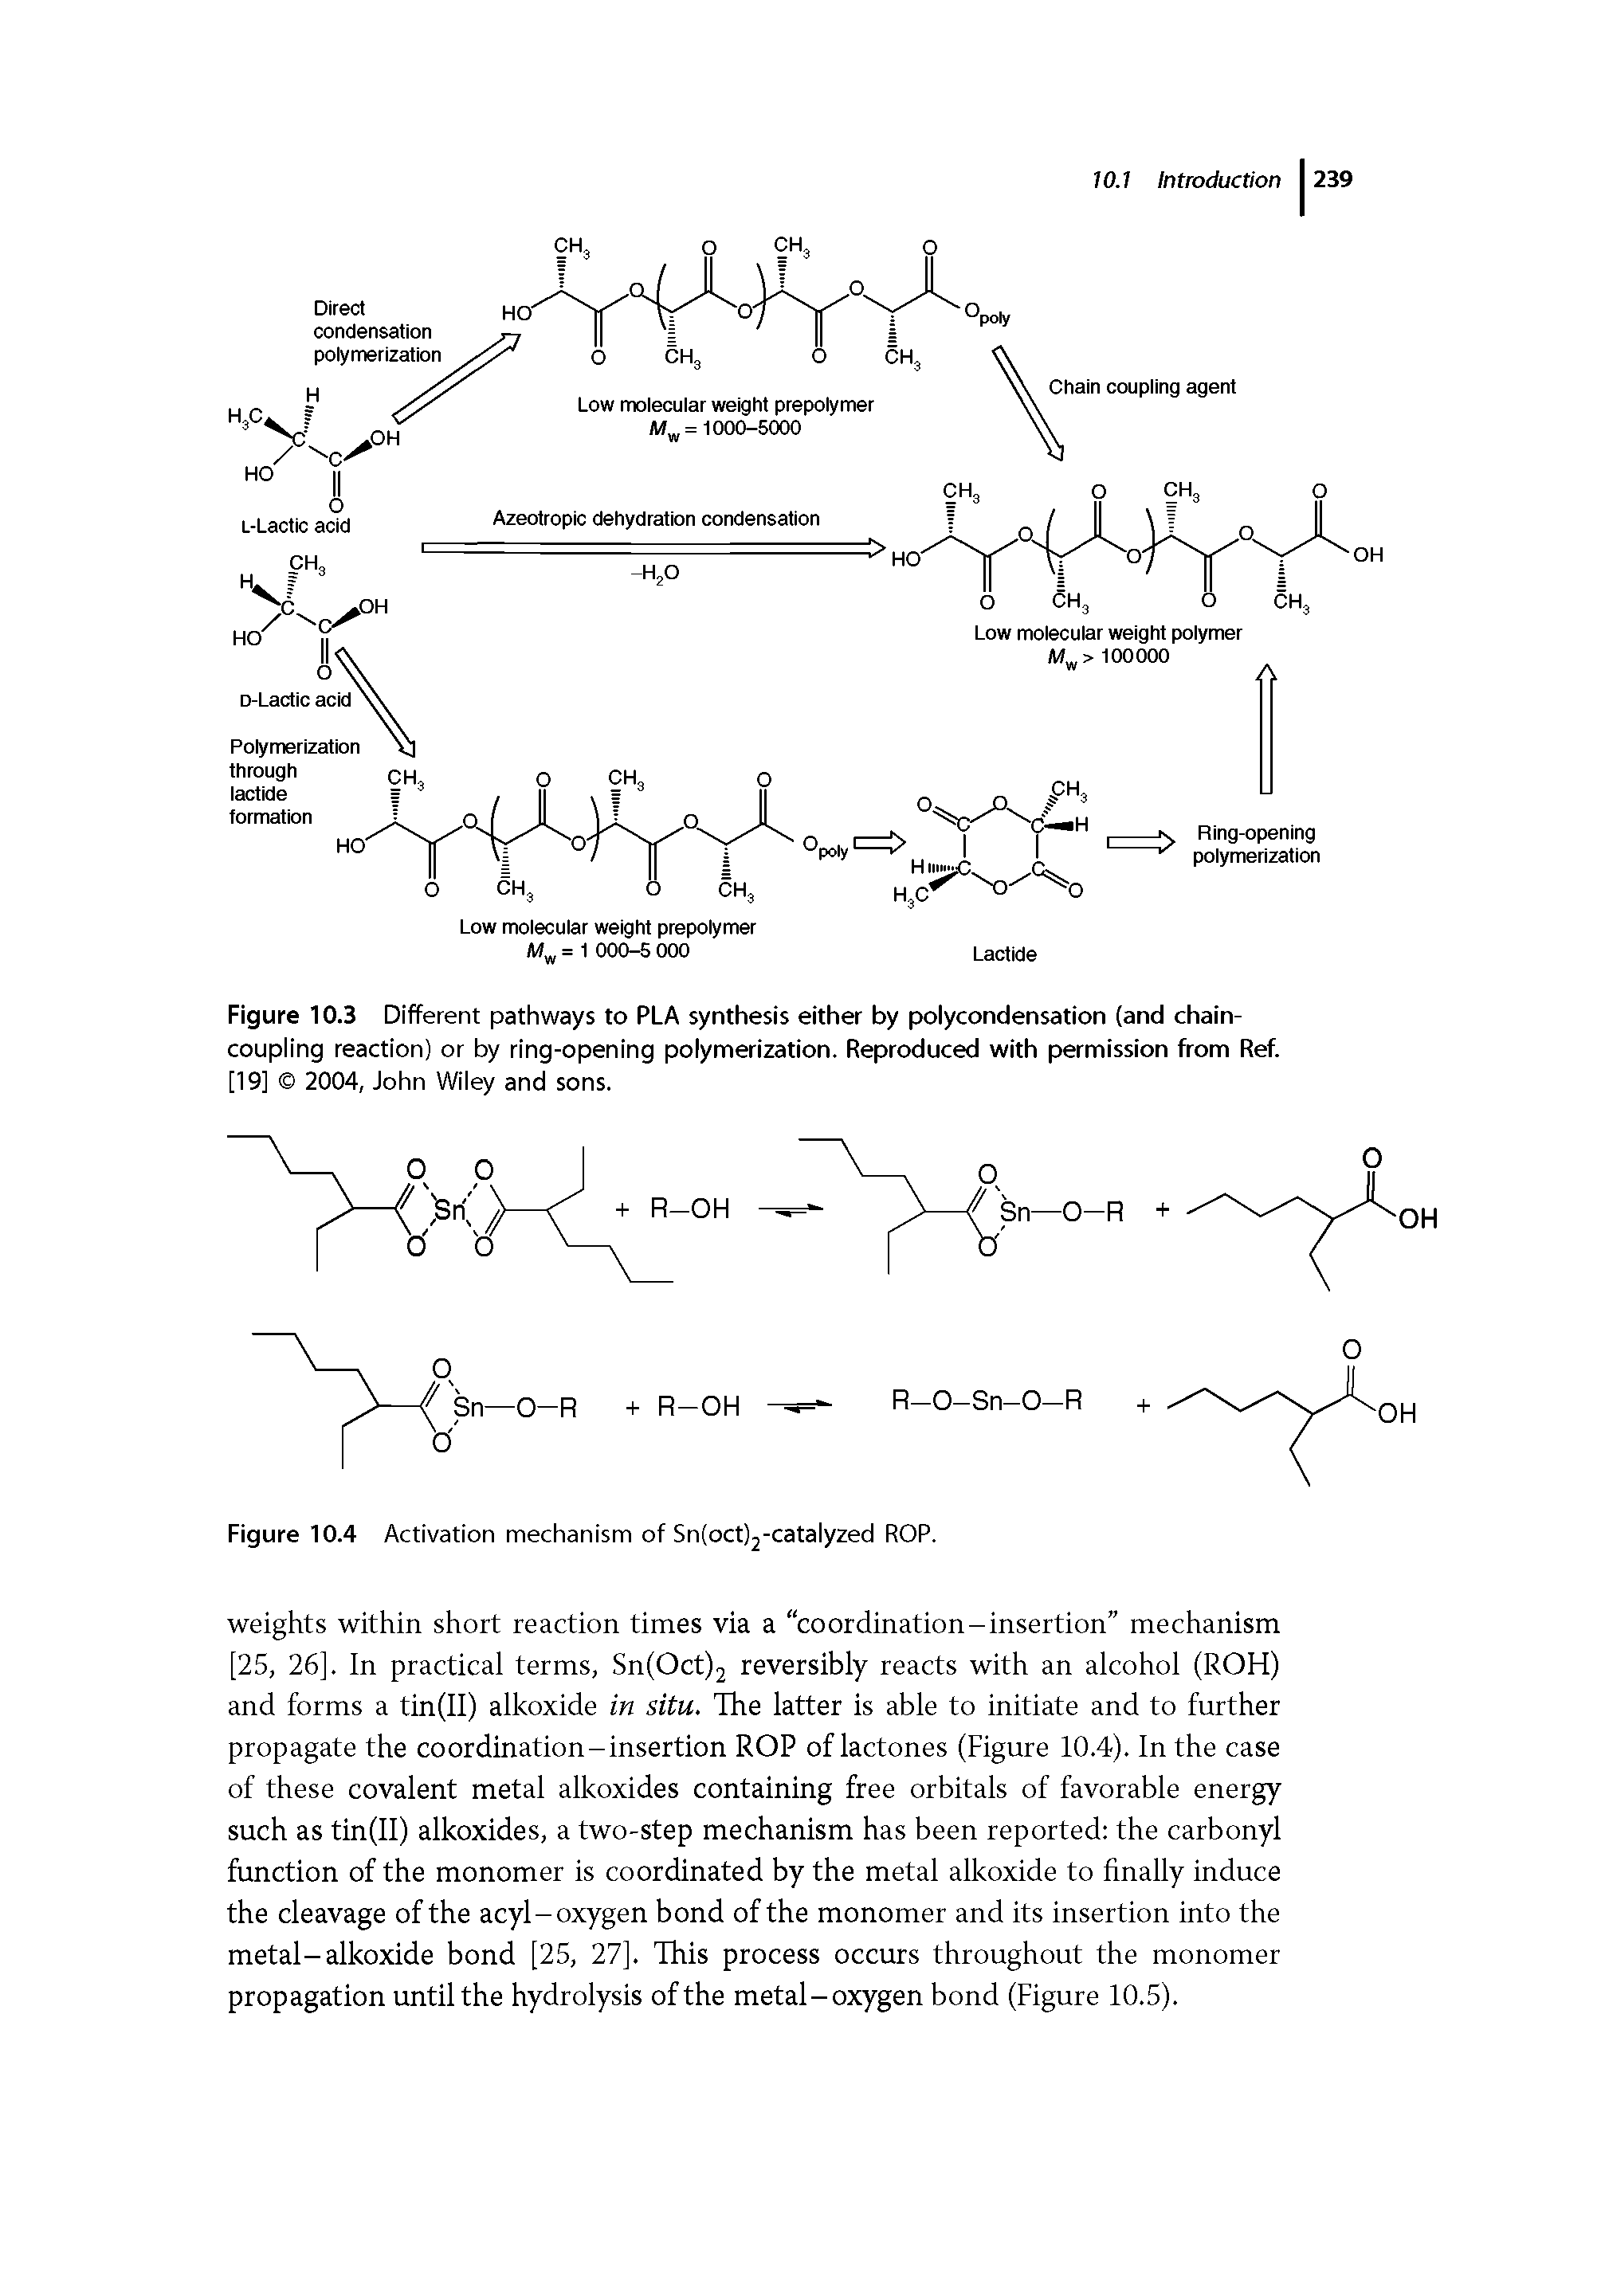 Figure 10.3 Different pathways to PLA synthesis either by polycondensation (and chaincoupling reaction) or by ring-opening polymerization. Reproduced with permission from Ref. [19] 2004, John Wiiey and sons.